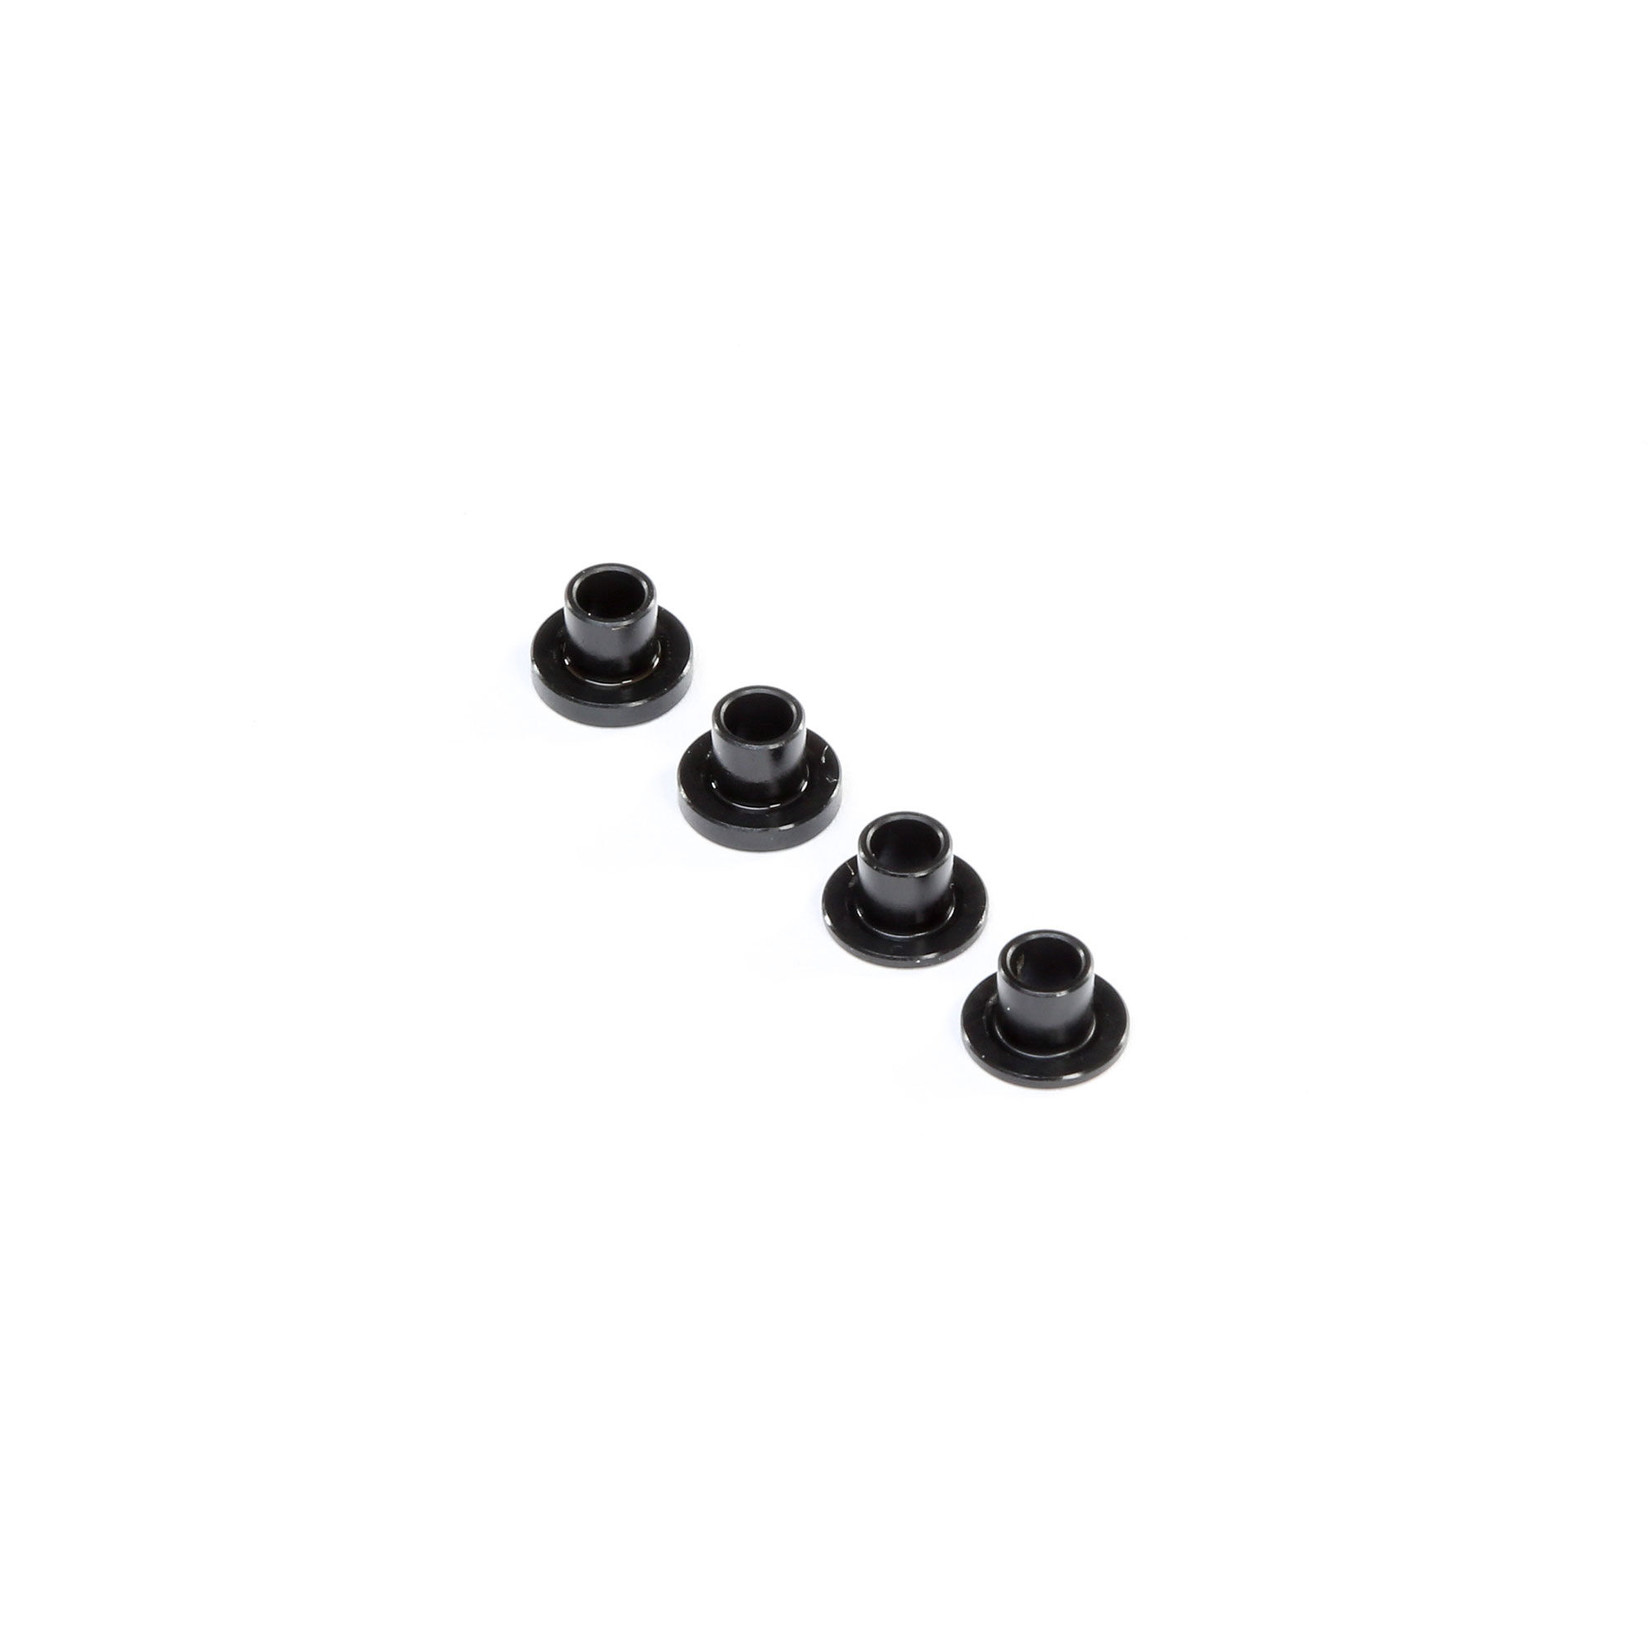 Team Losi Racing (TLR) Spindle Shim (4): 8X, 8XE